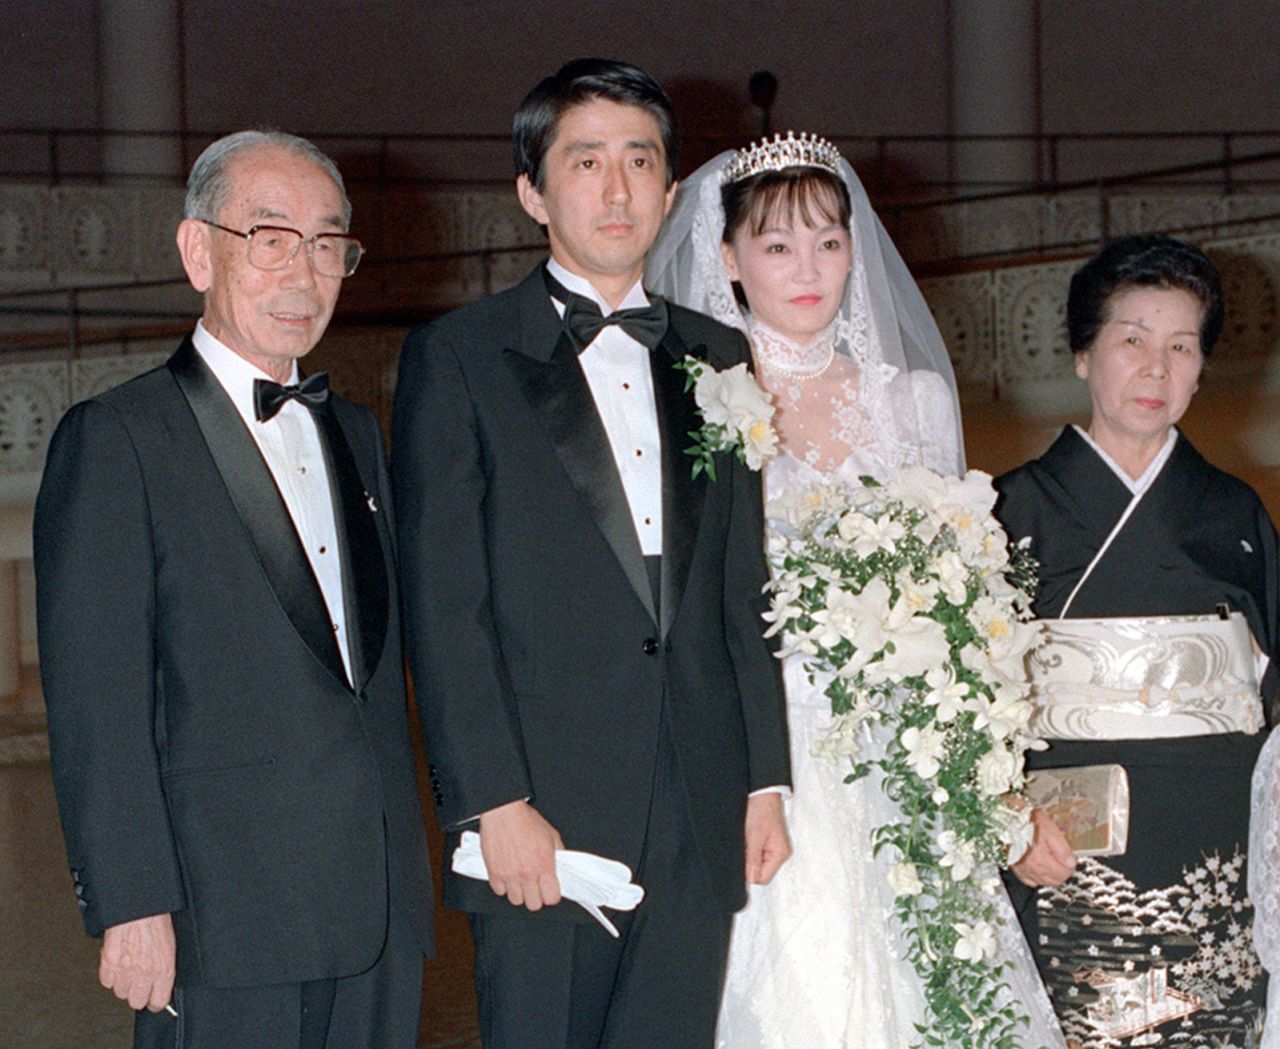 Abe and his wife, Akie, marry at their wedding in Tokyo in 1987. They were accompanied by former Japanese Prime Minister Takeo Fukuda and his wife, Mie. 